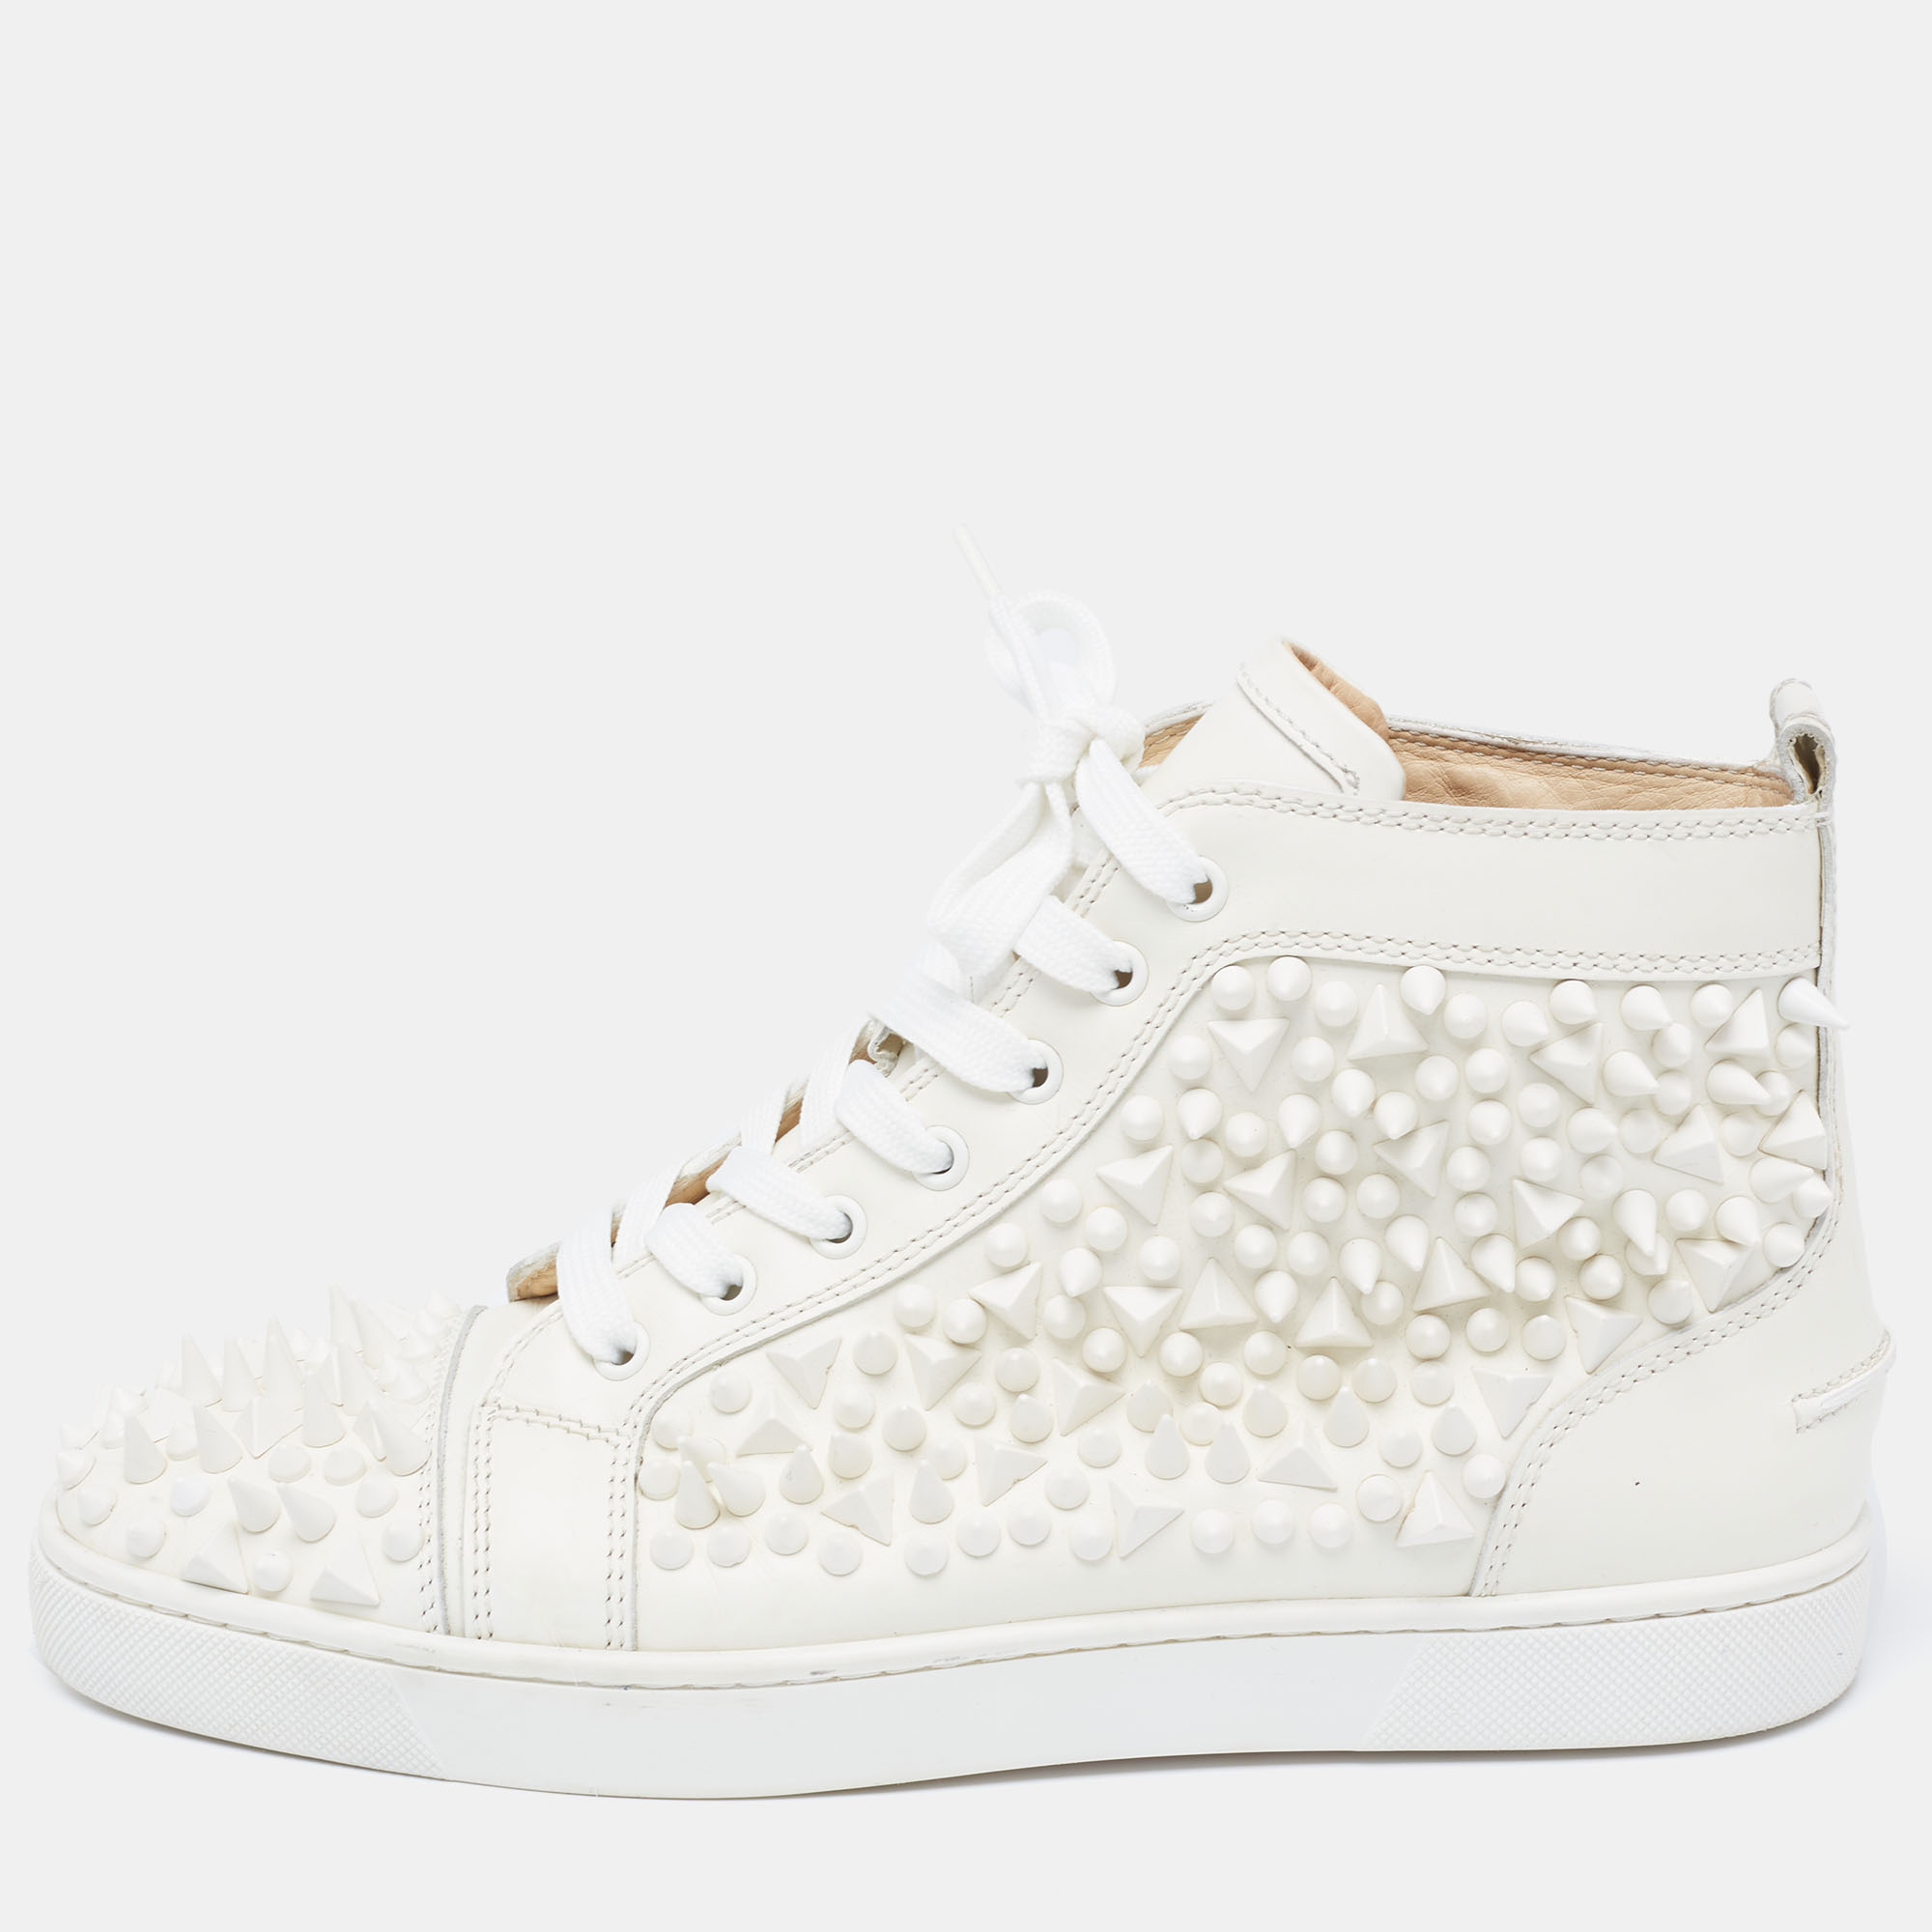 Pre-owned Christian Louboutin White Leather Louis Spikes Lace Up High Top Sneakers Size 42